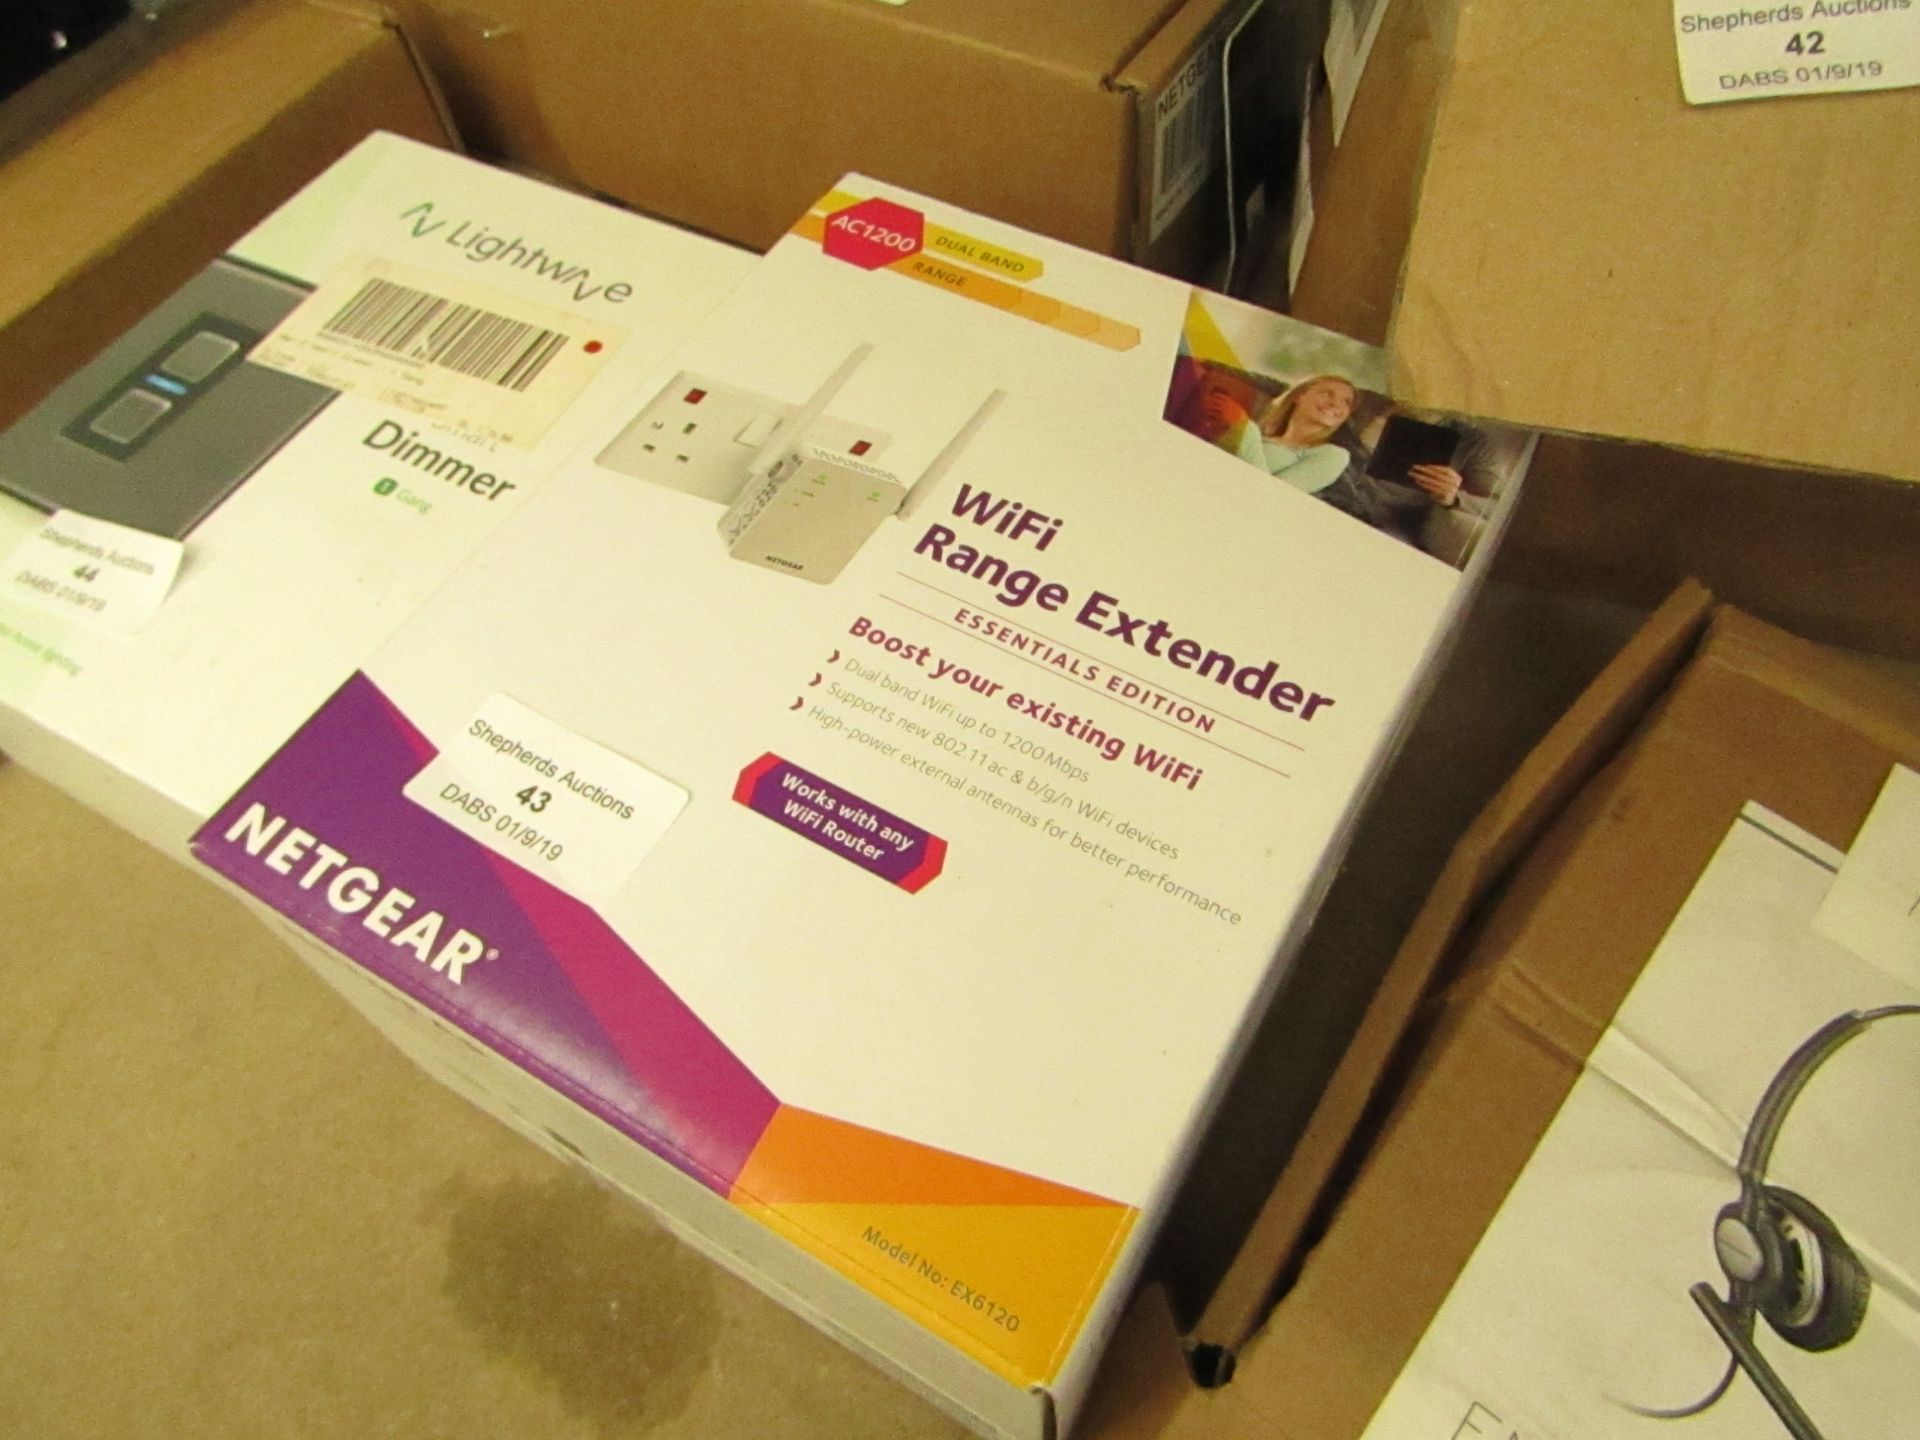 Netgear WiFi range extender, untested and boxed.